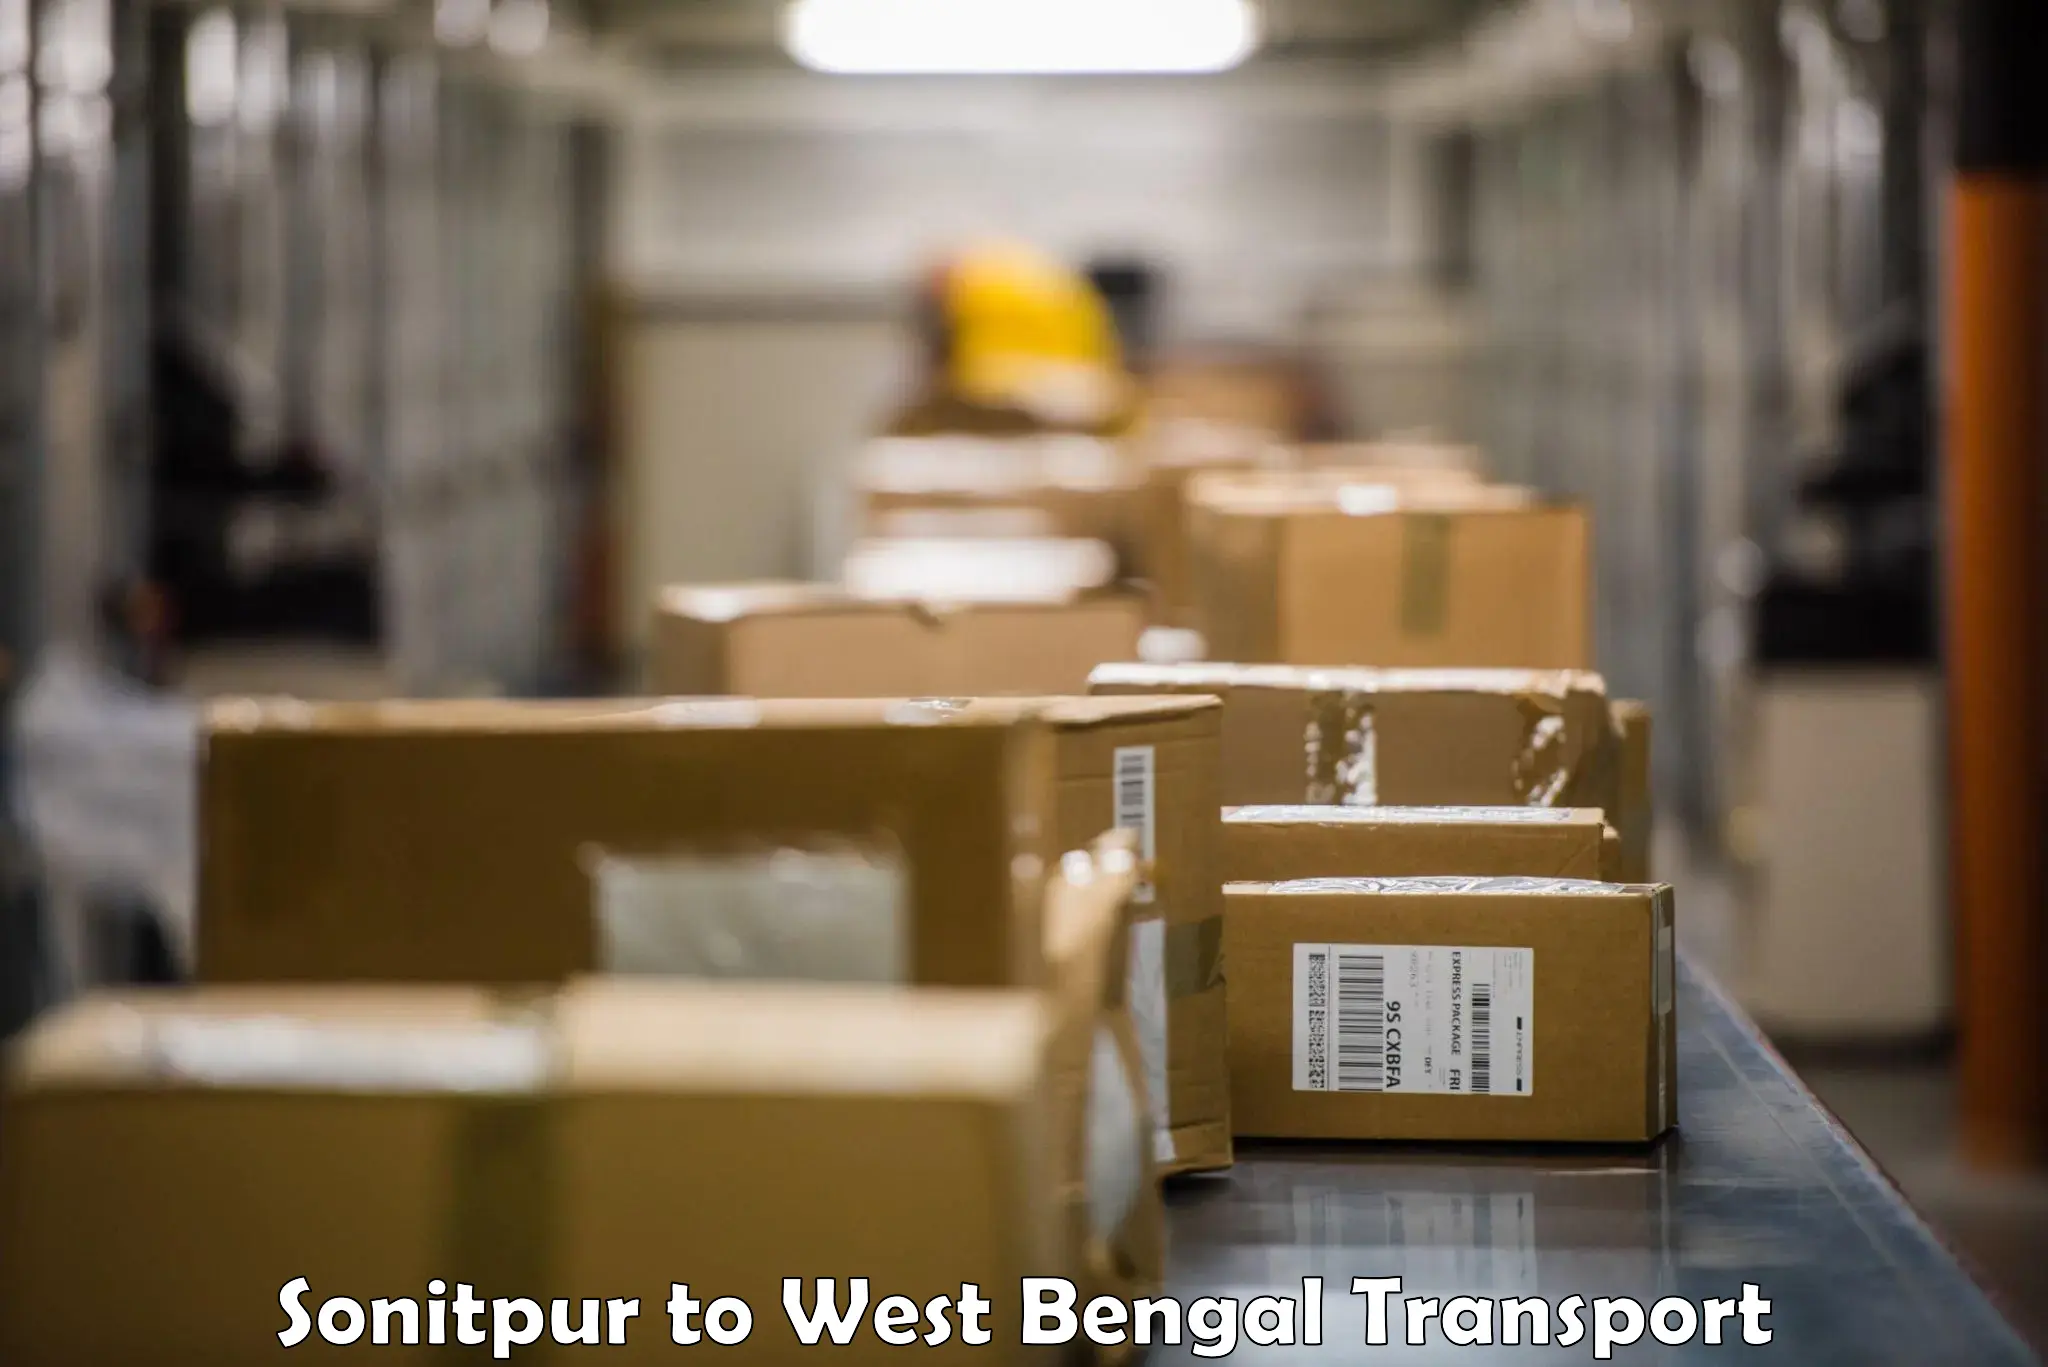 Nearby transport service Sonitpur to Barrackpore